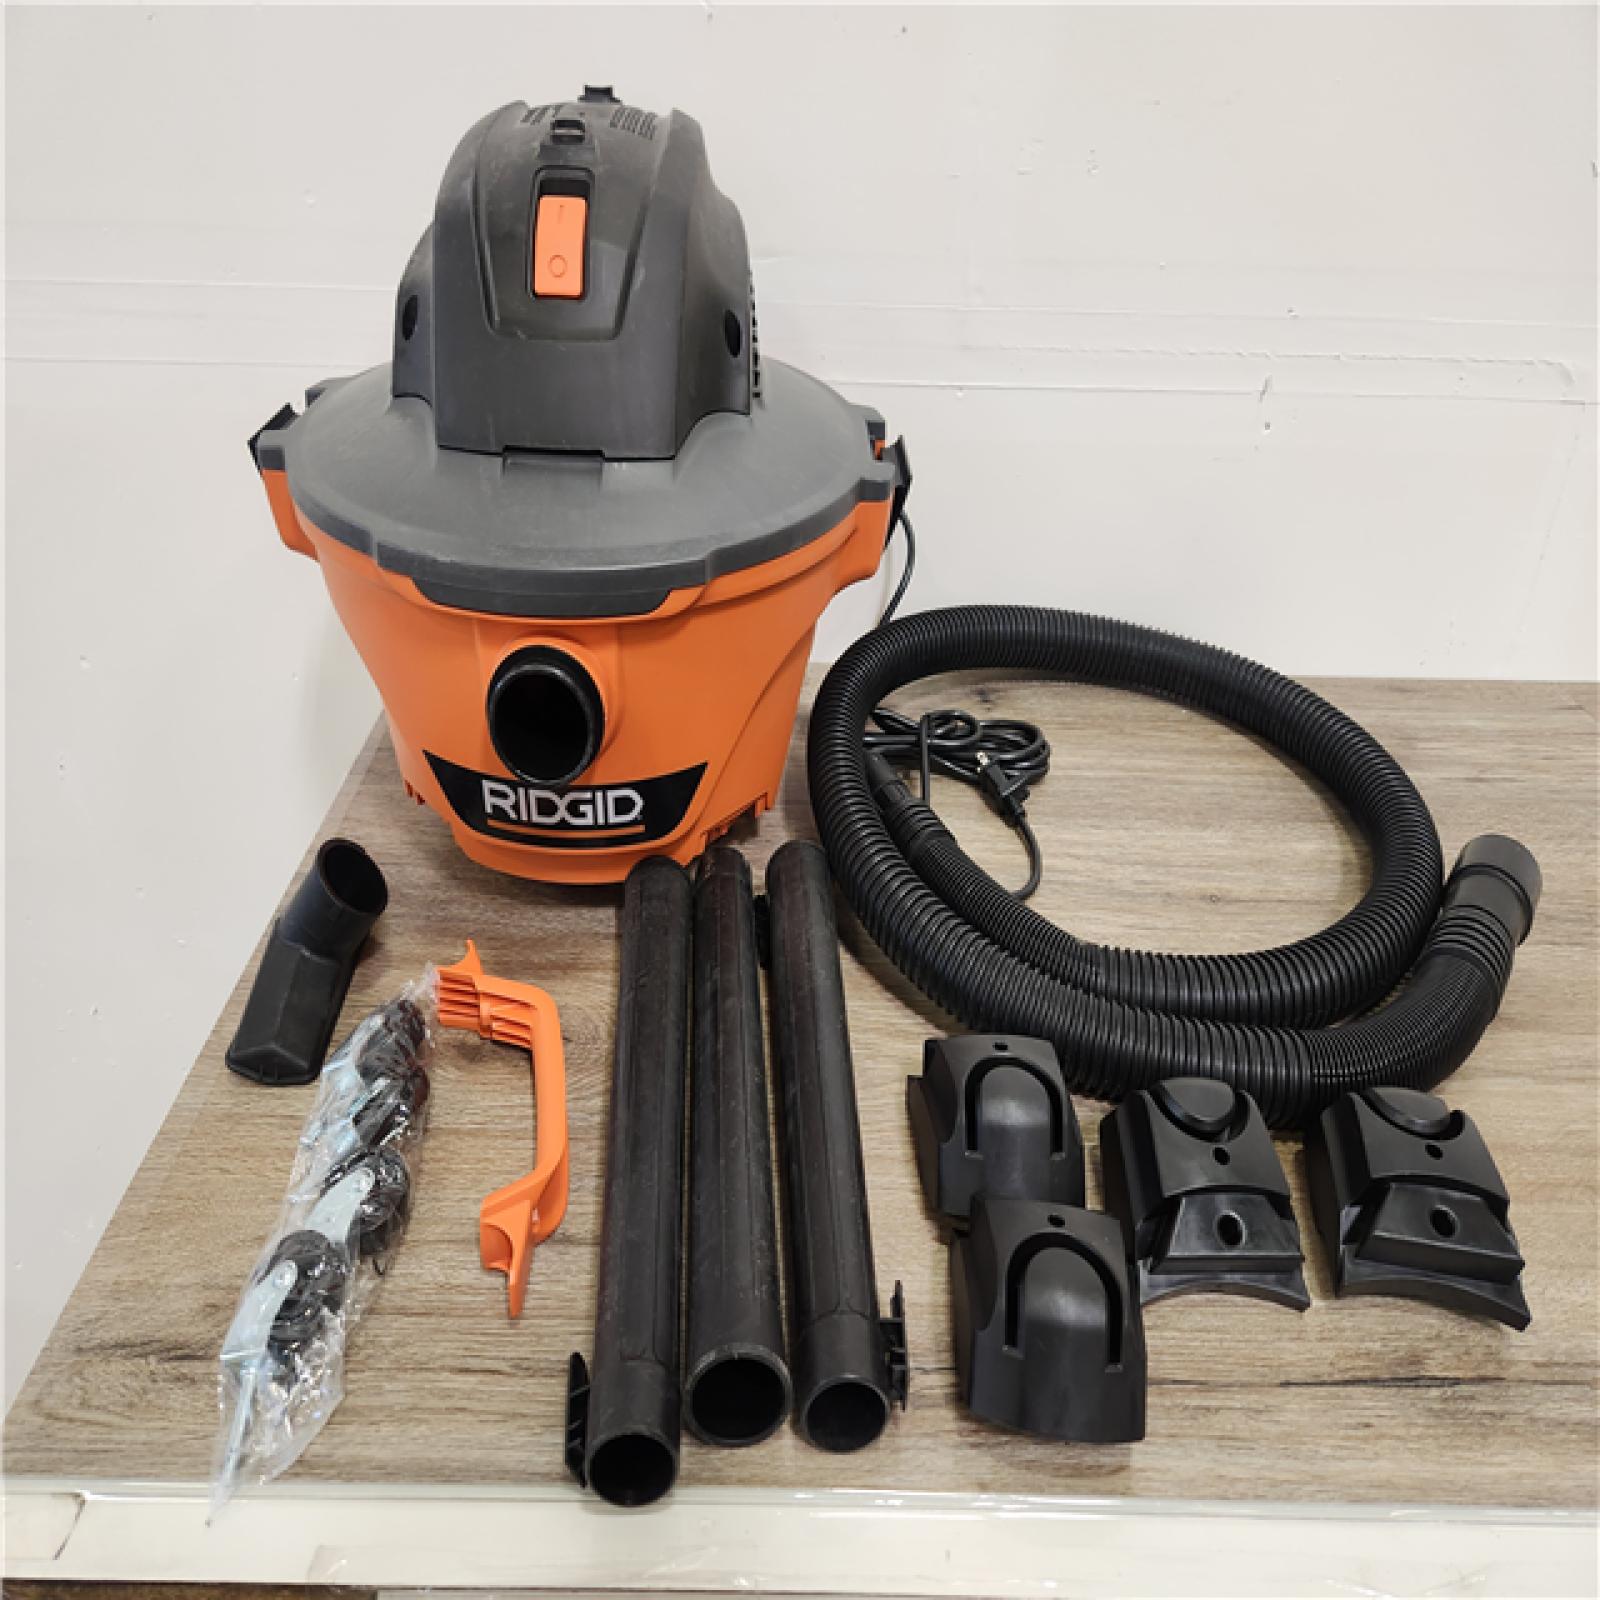 Phoenix Location RIDGID 6 Gallon 3.5 Peak HP NXT Wet/Dry Shop Vacuum with Filter, Hose, Wands, Utility Nozzle and Car Cleaning Attachment Kit